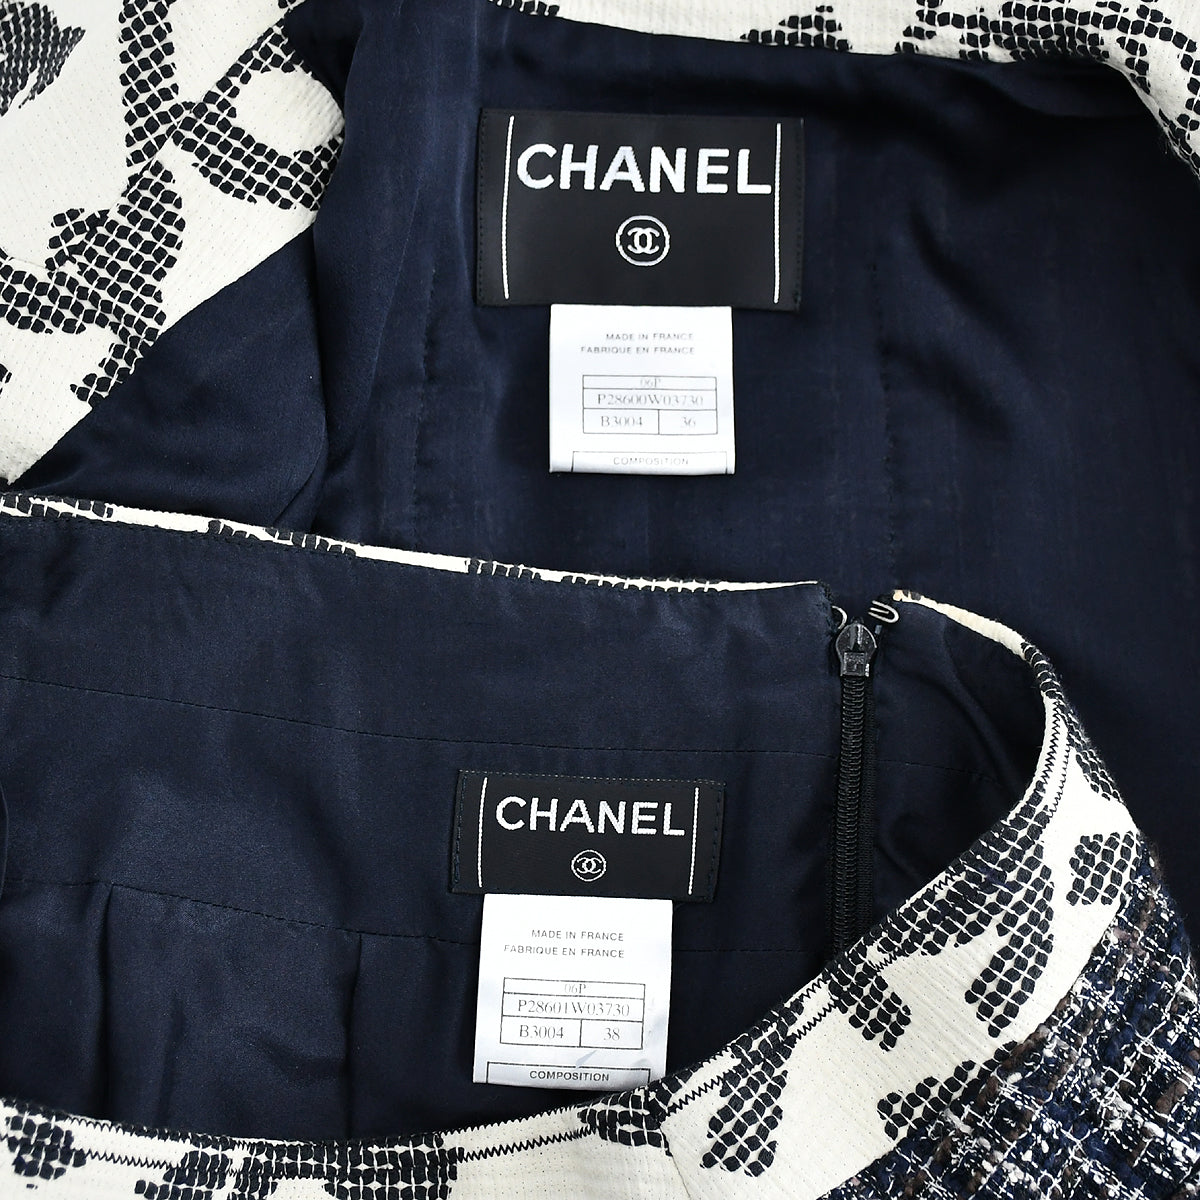 Chanel single-breasted skirt suit 